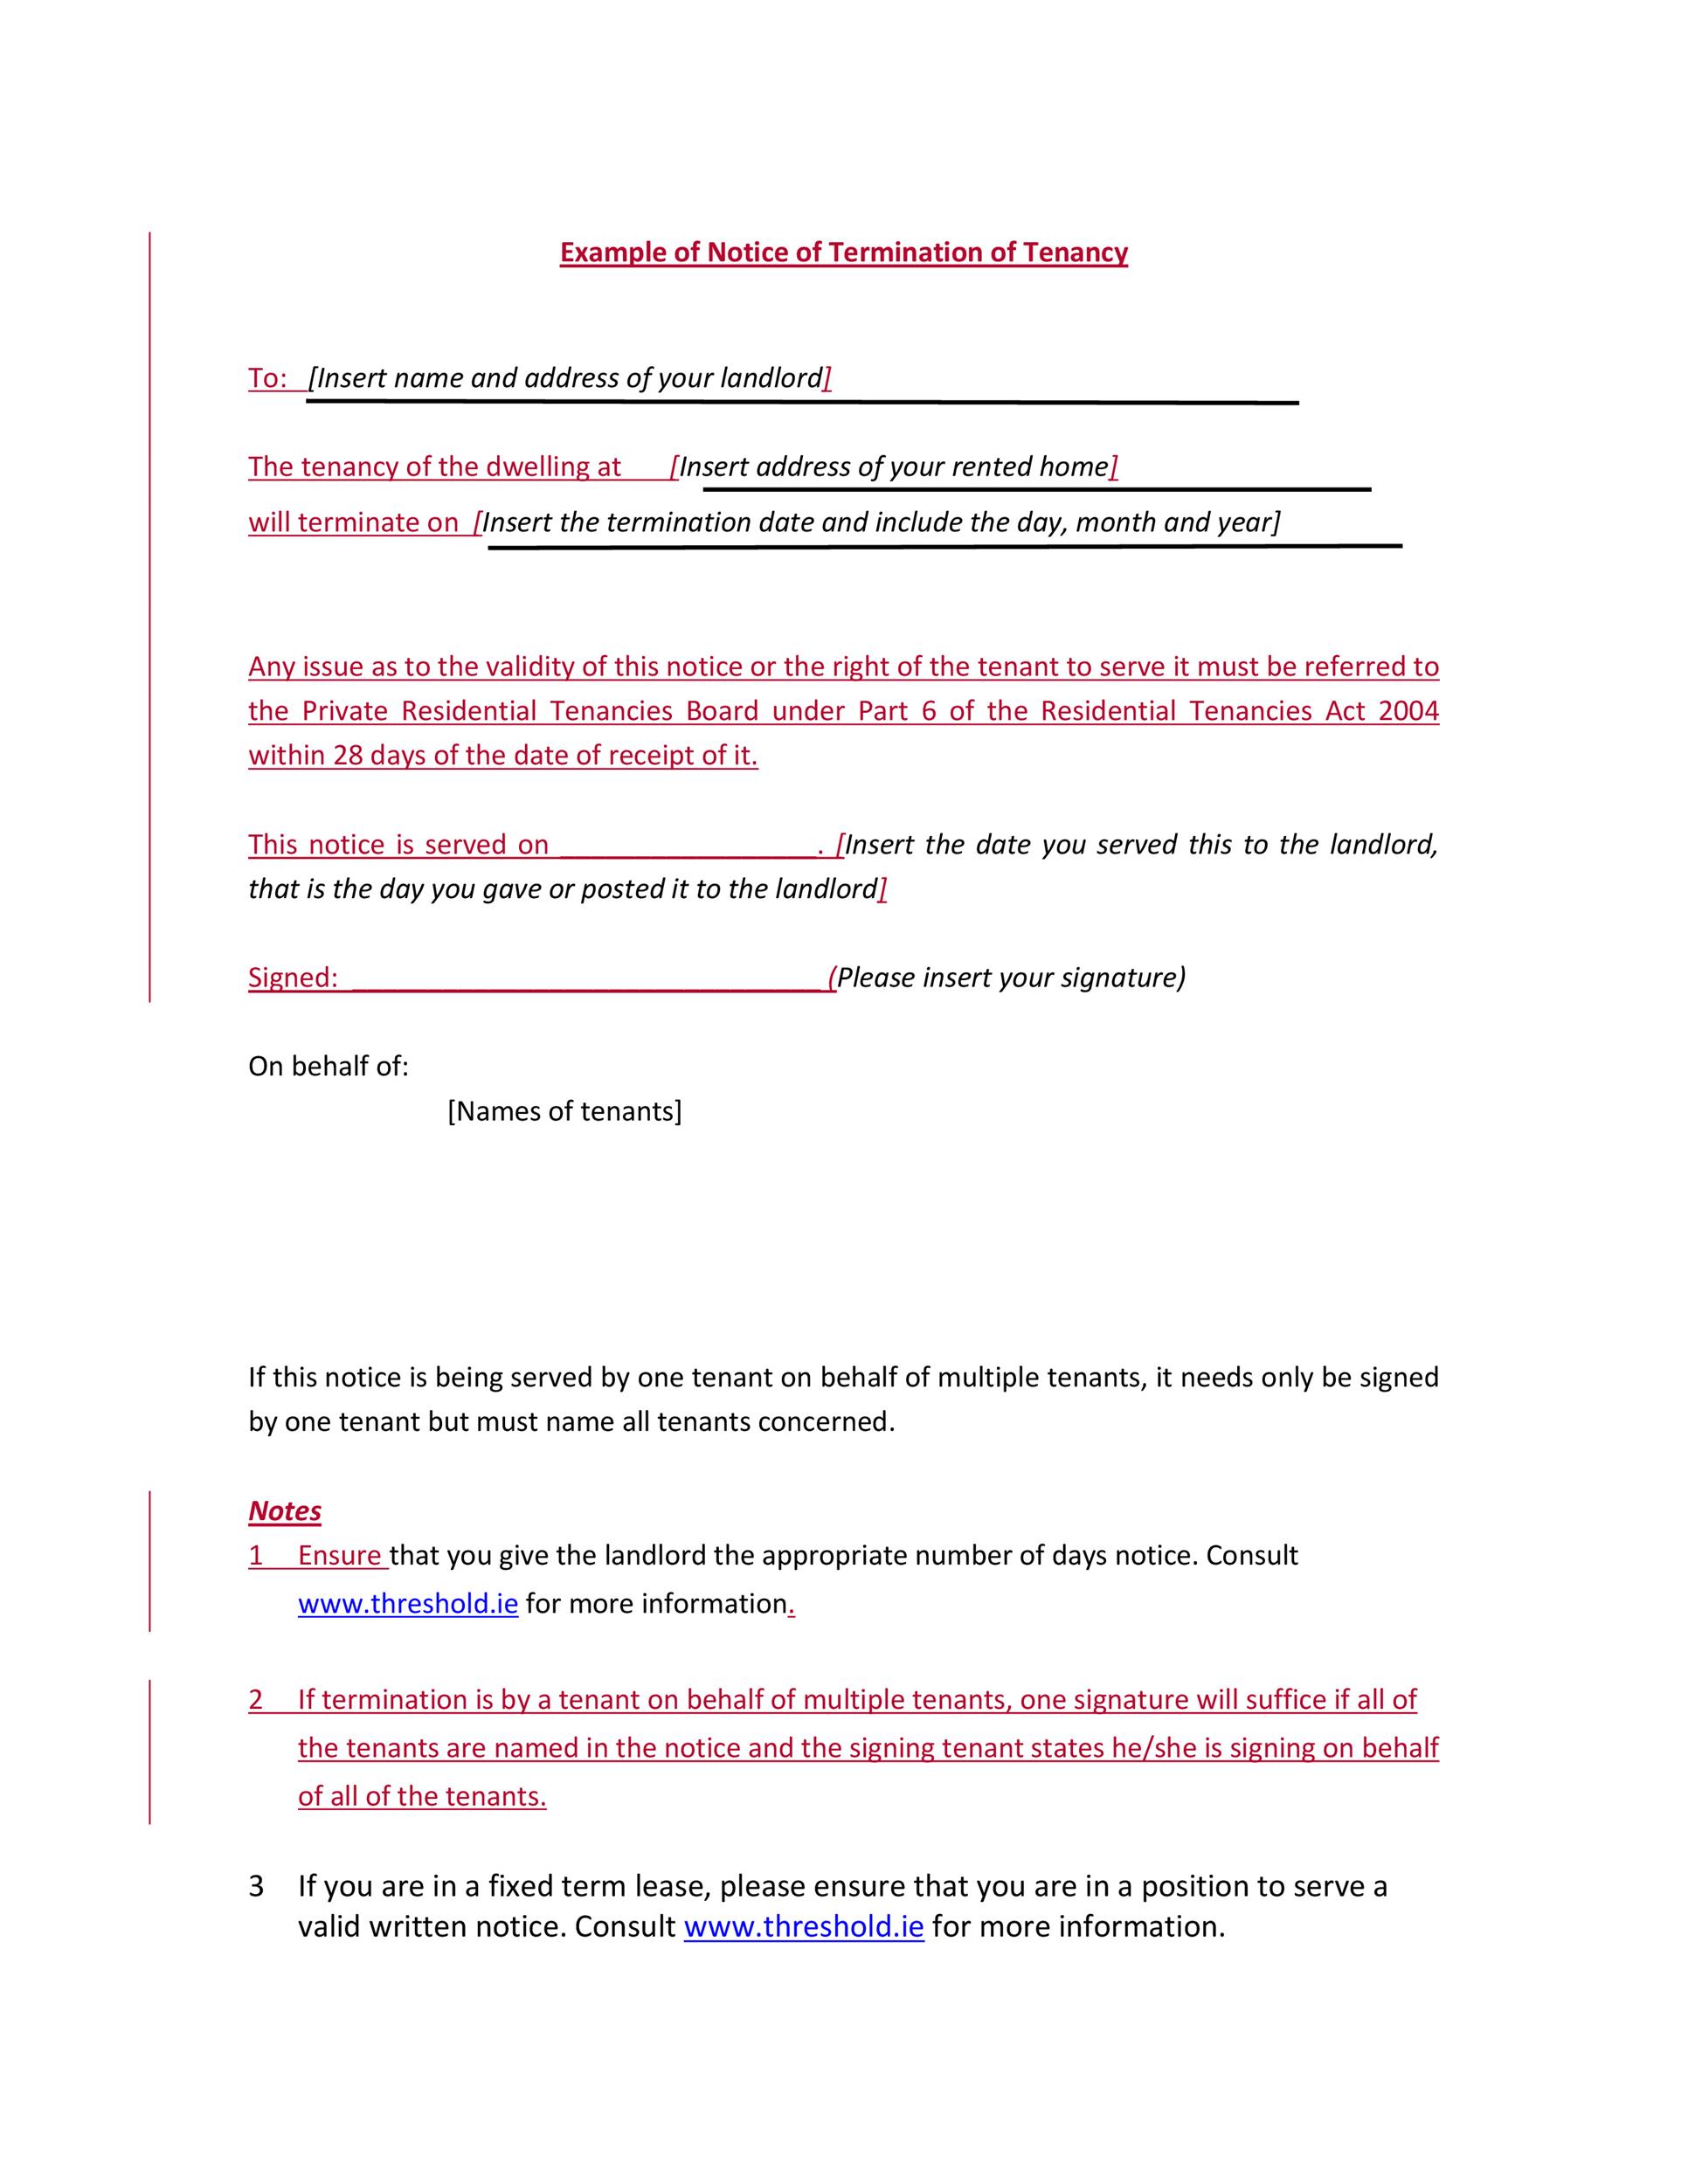 Free Example of Notice of Termination of Tenancy